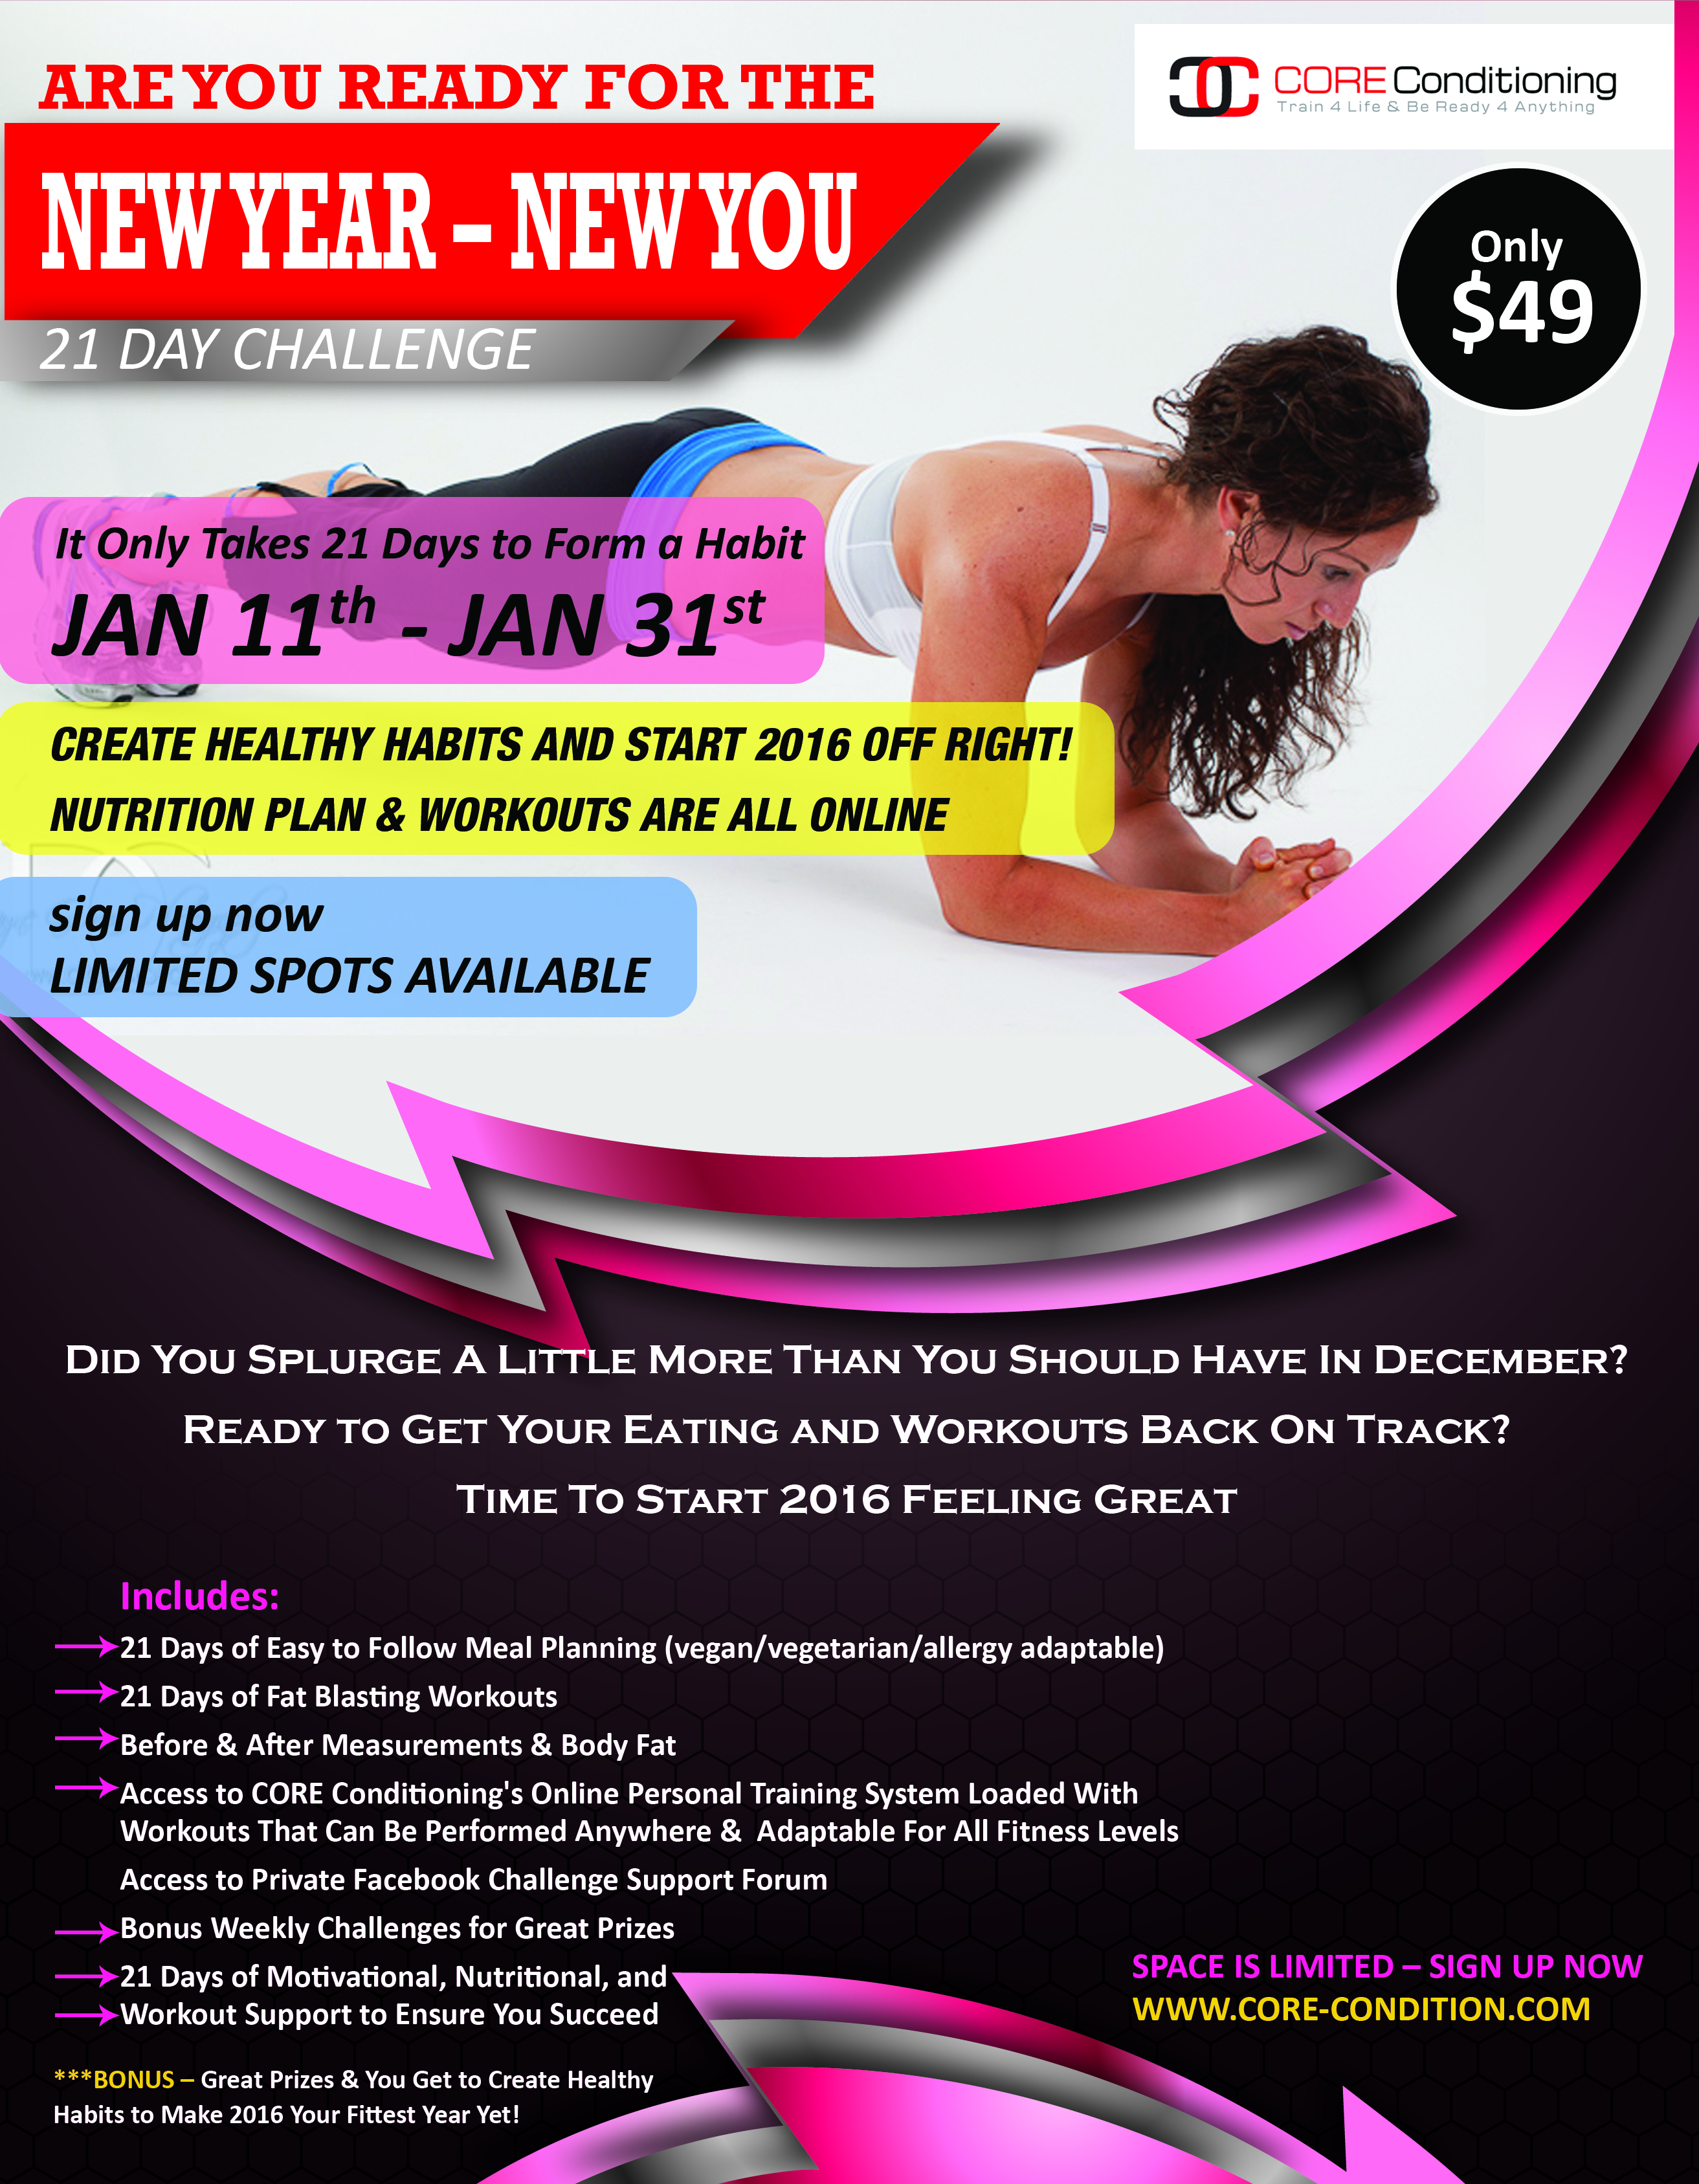 It’s Challenge Time! CORE Conditioning Present: New Year – New You – 21 Day Challenge